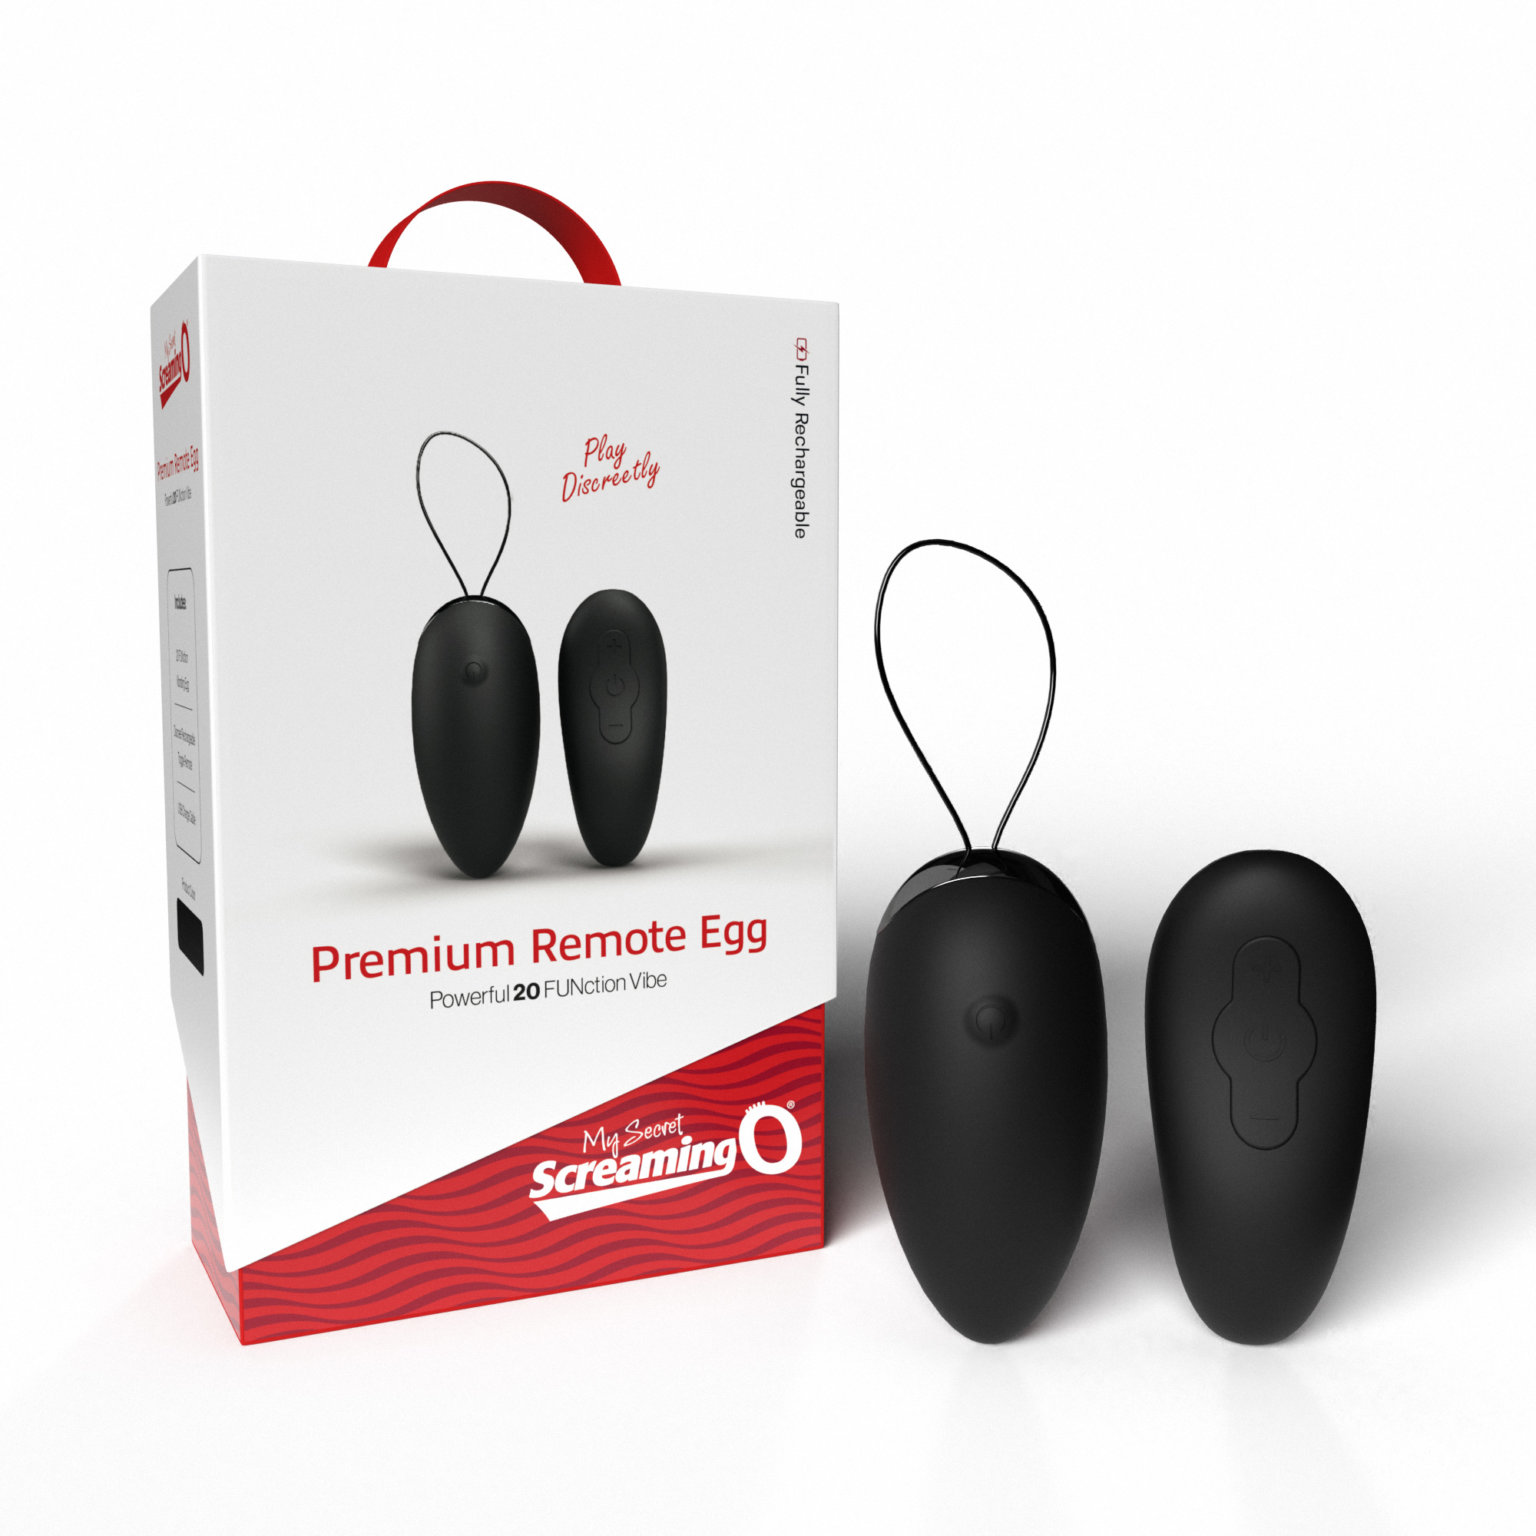 My+Secret+Screaming+O+Premium+Remote+Control+Rechargeable+Silicone+Egg+-+Black